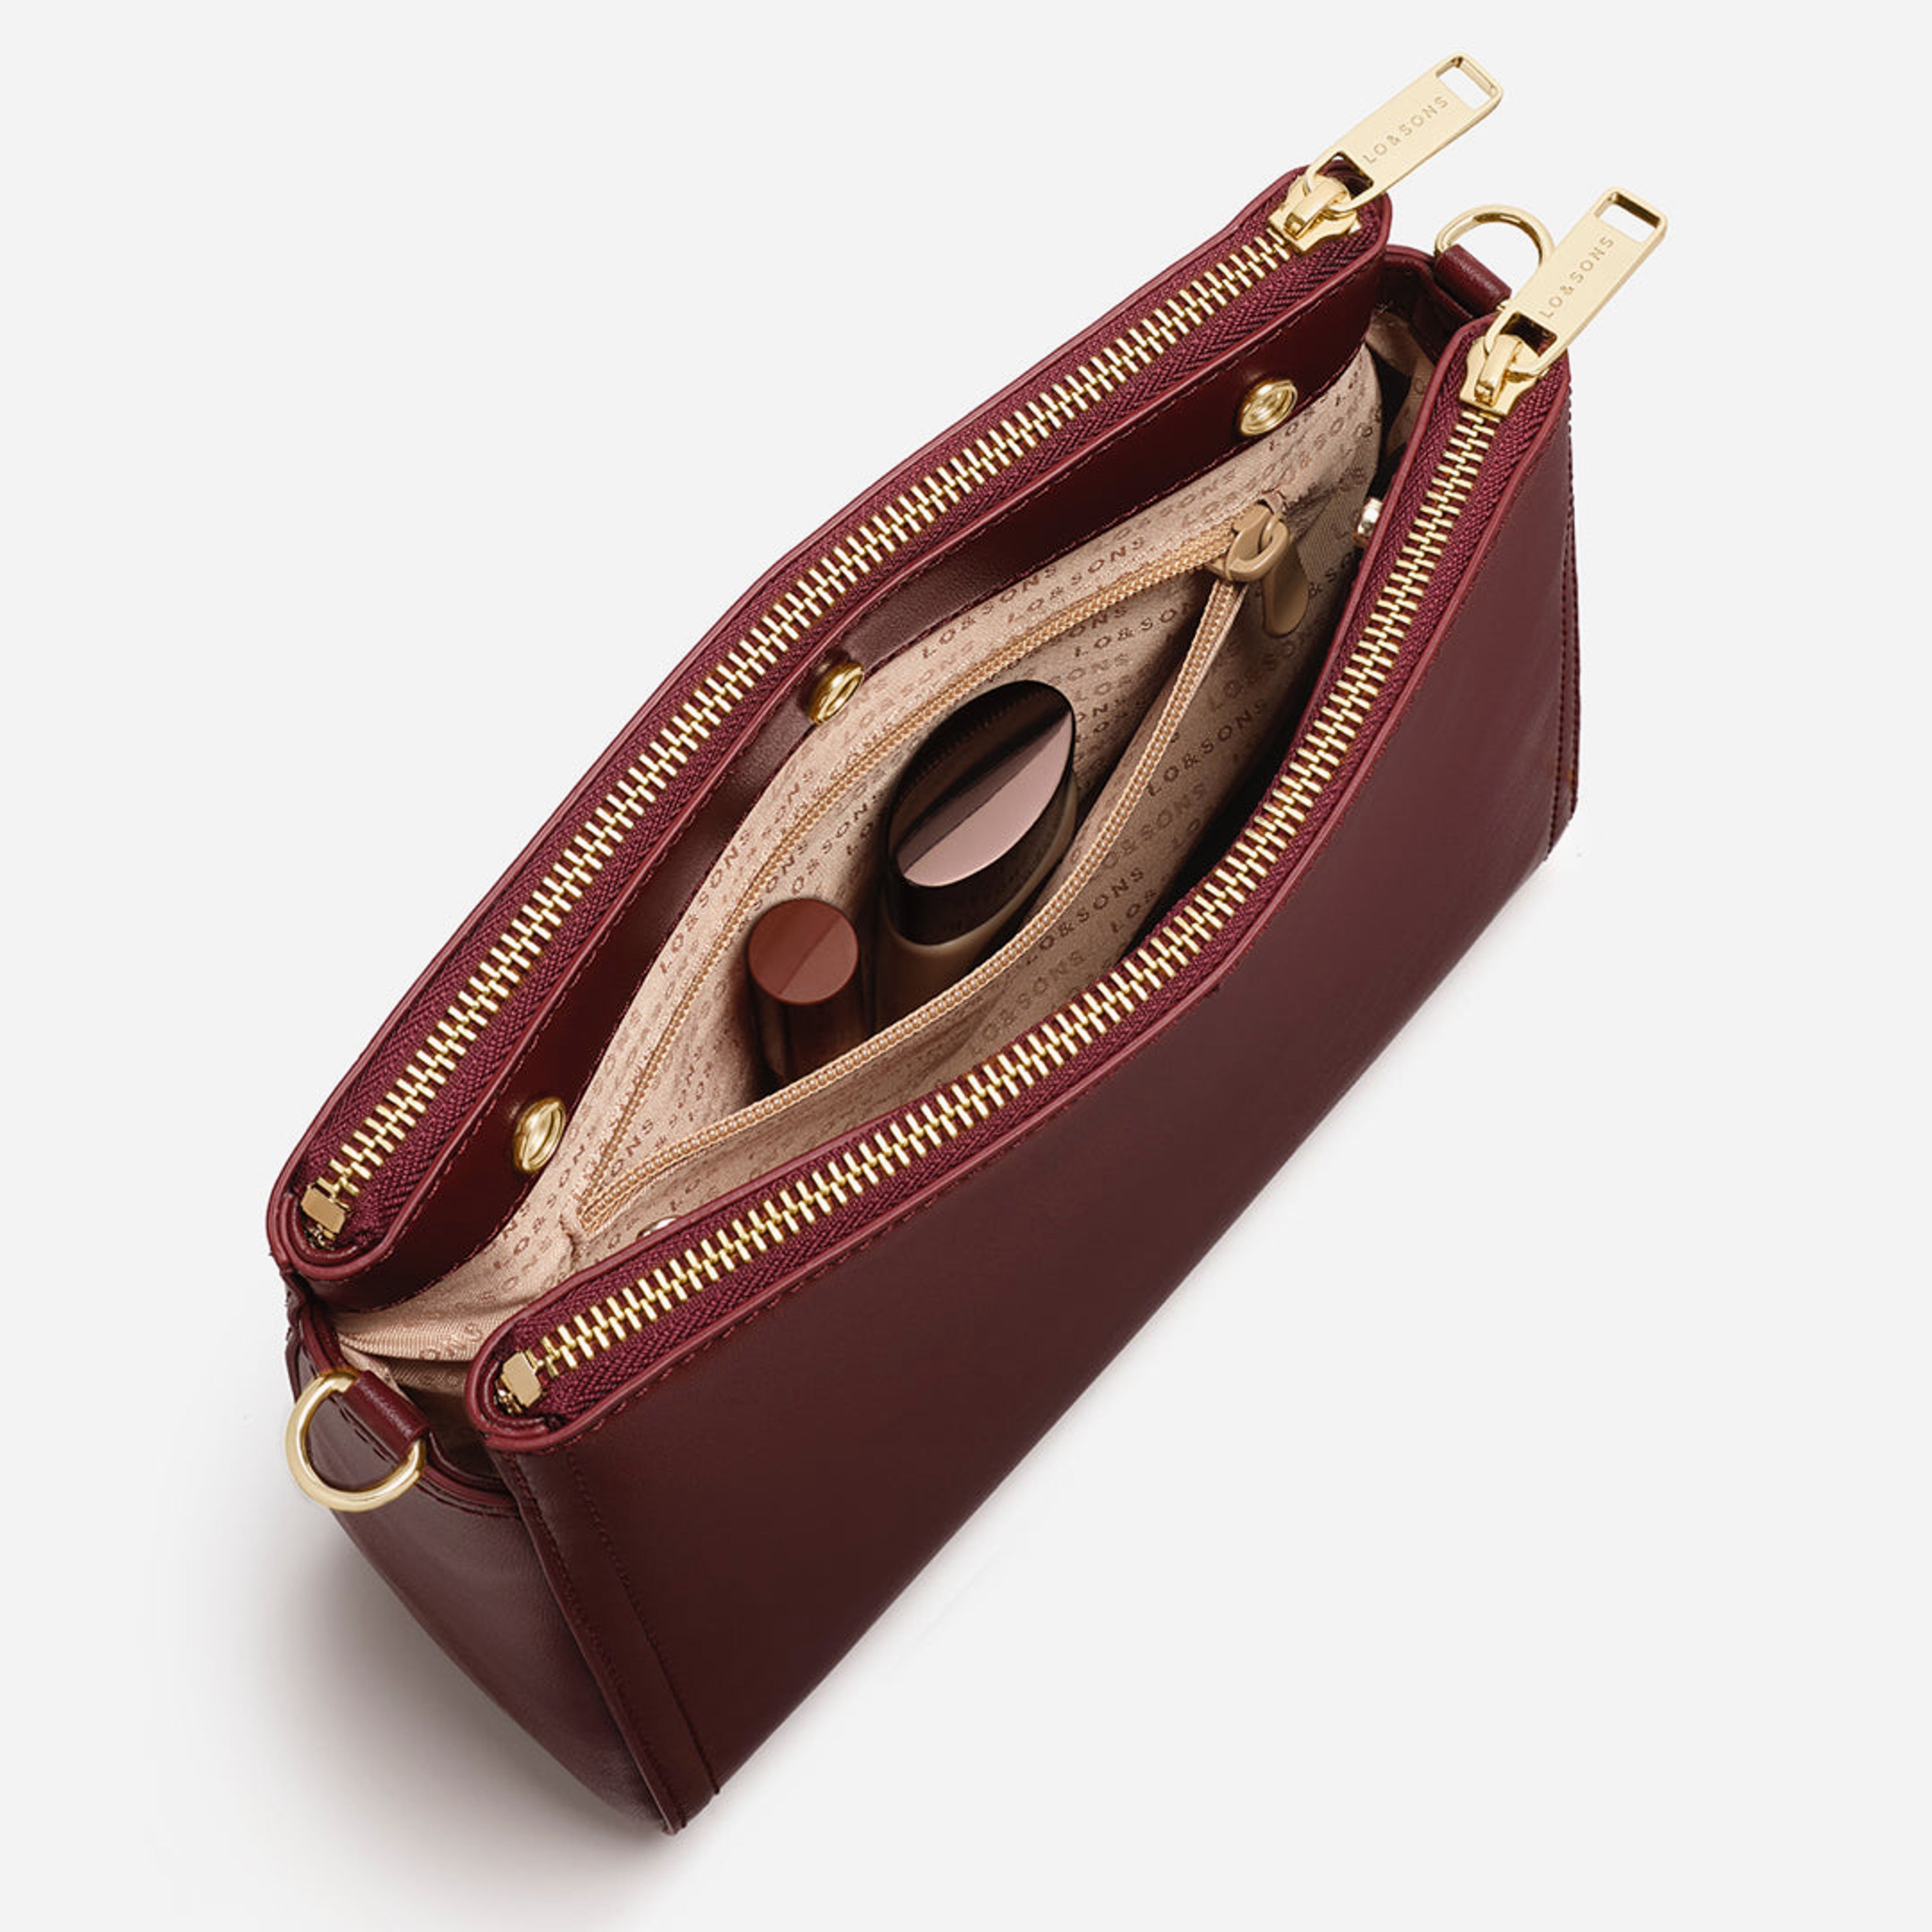 The Pearl - Cactus Leather - Burgundy / Gold / Camel